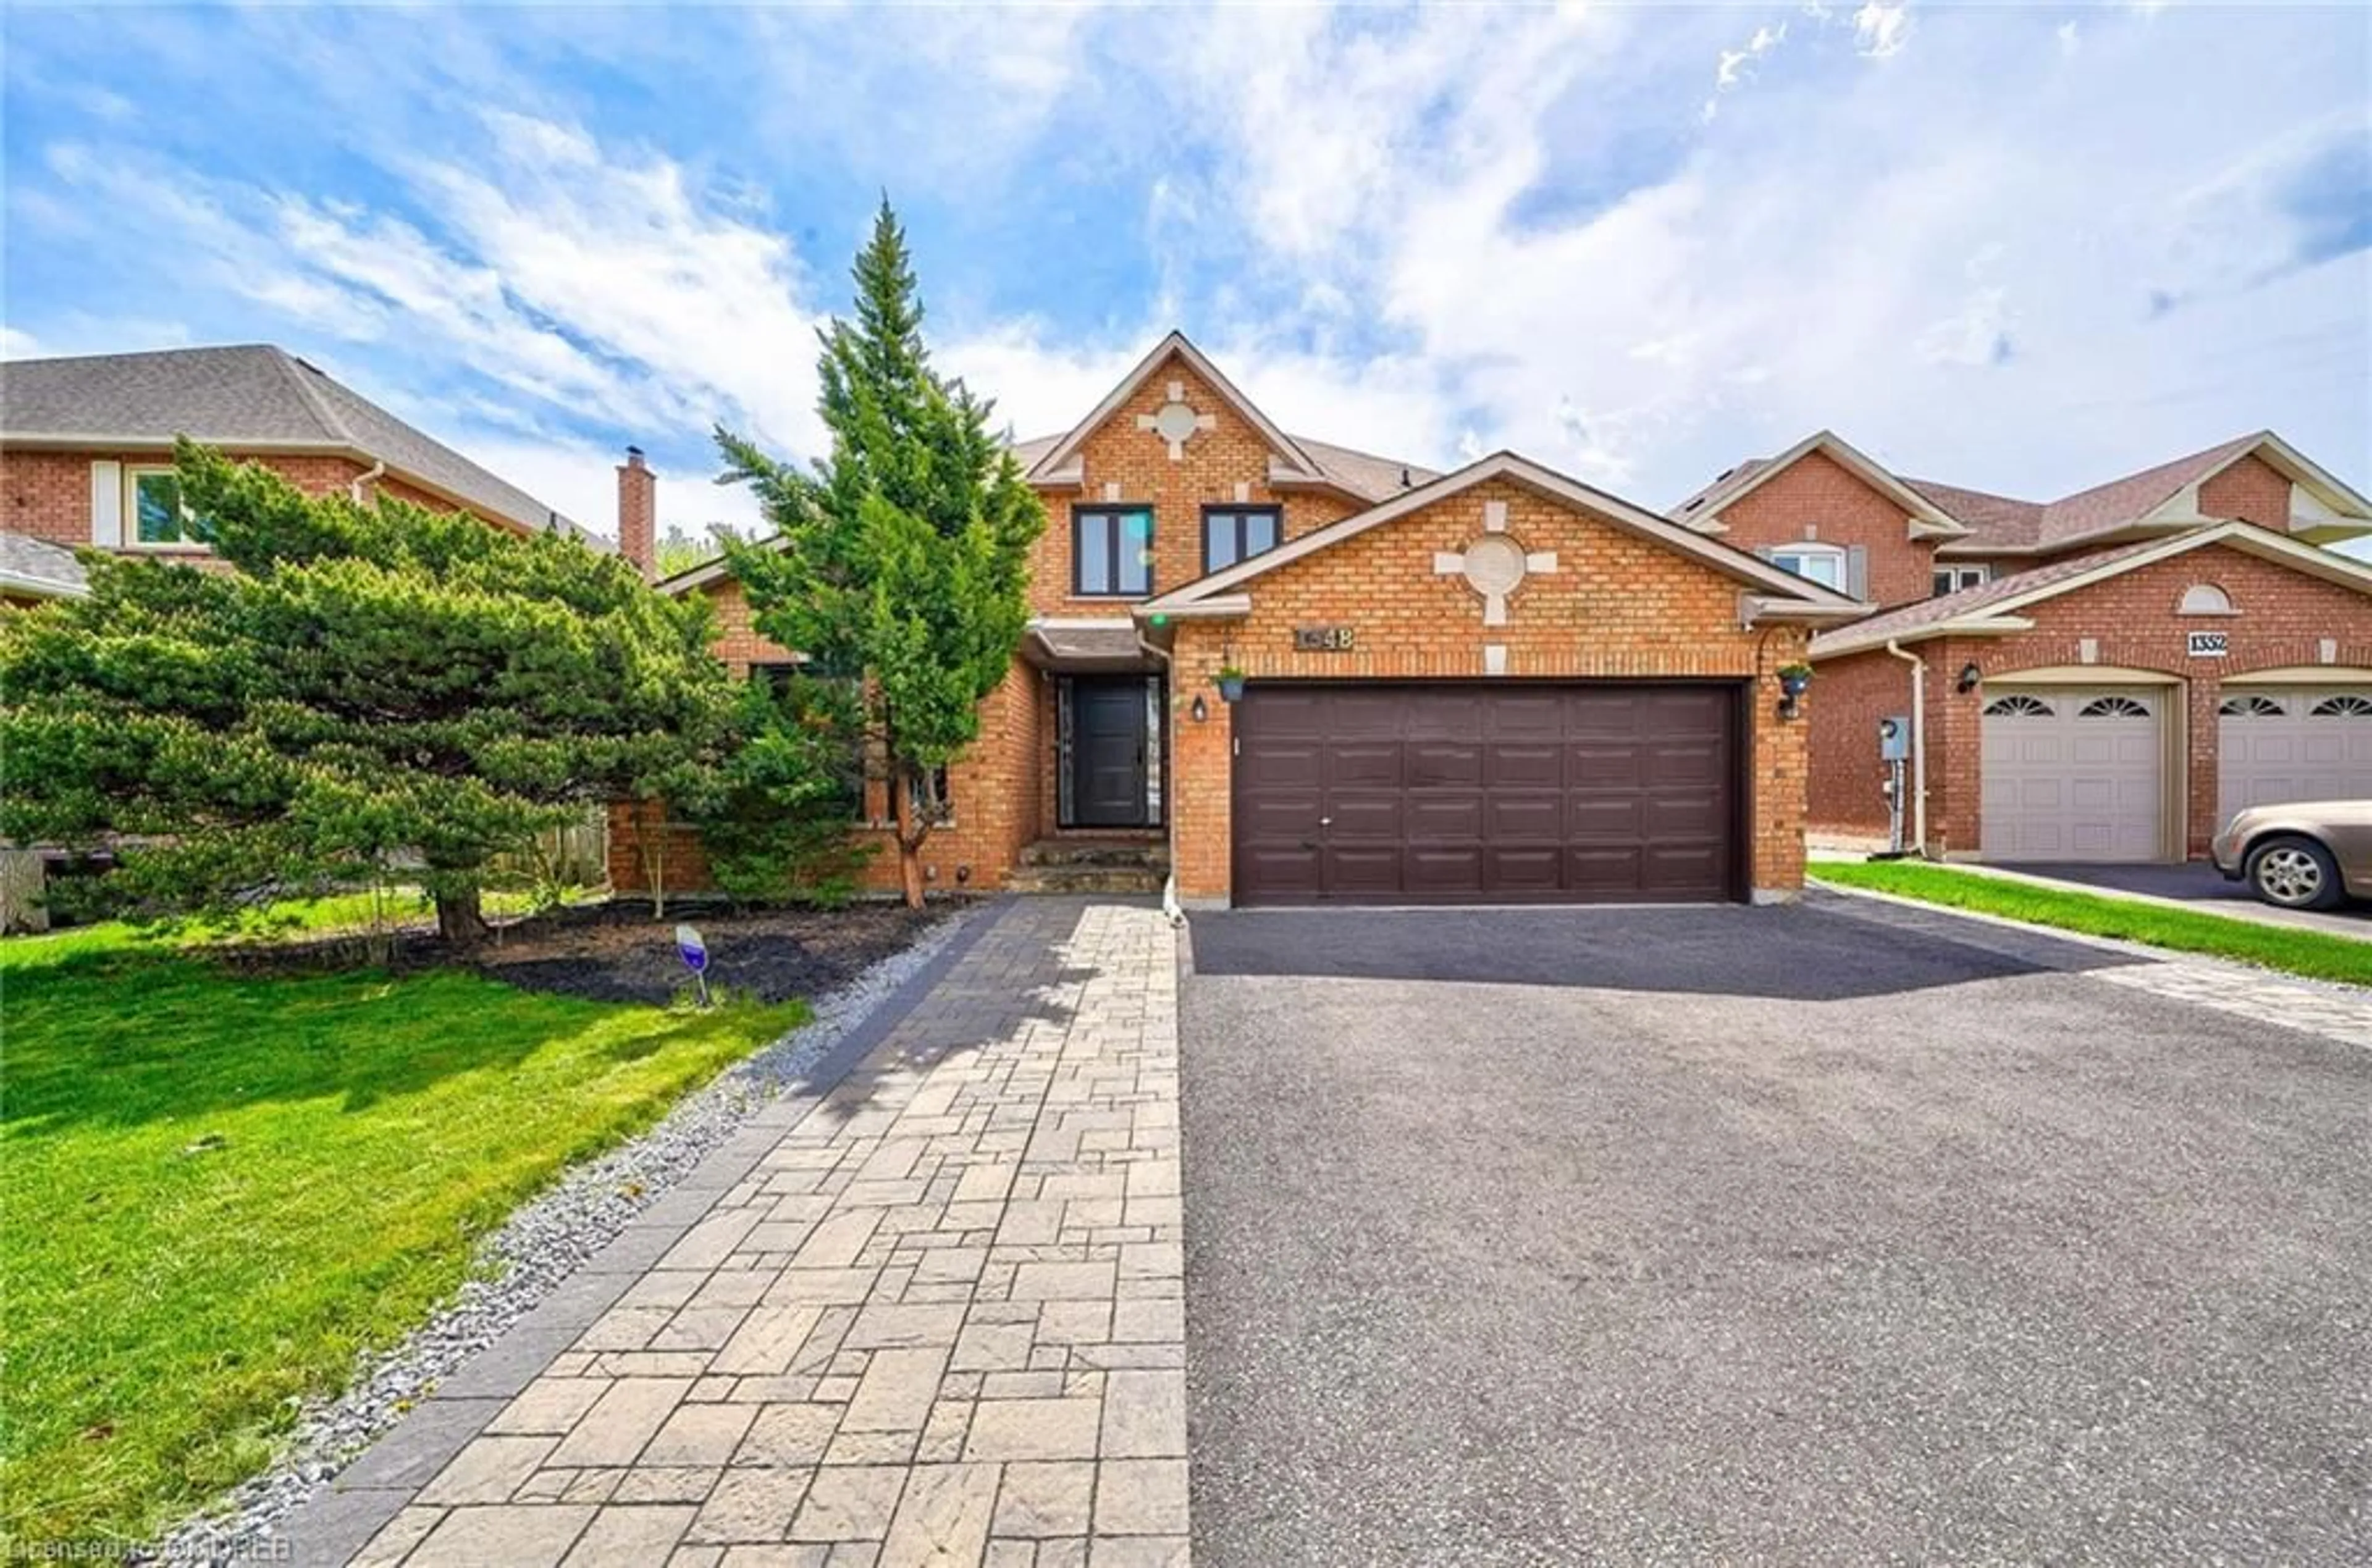 Home with brick exterior material for 1348 Pilgrims Way, Oakville Ontario L6M 2M1